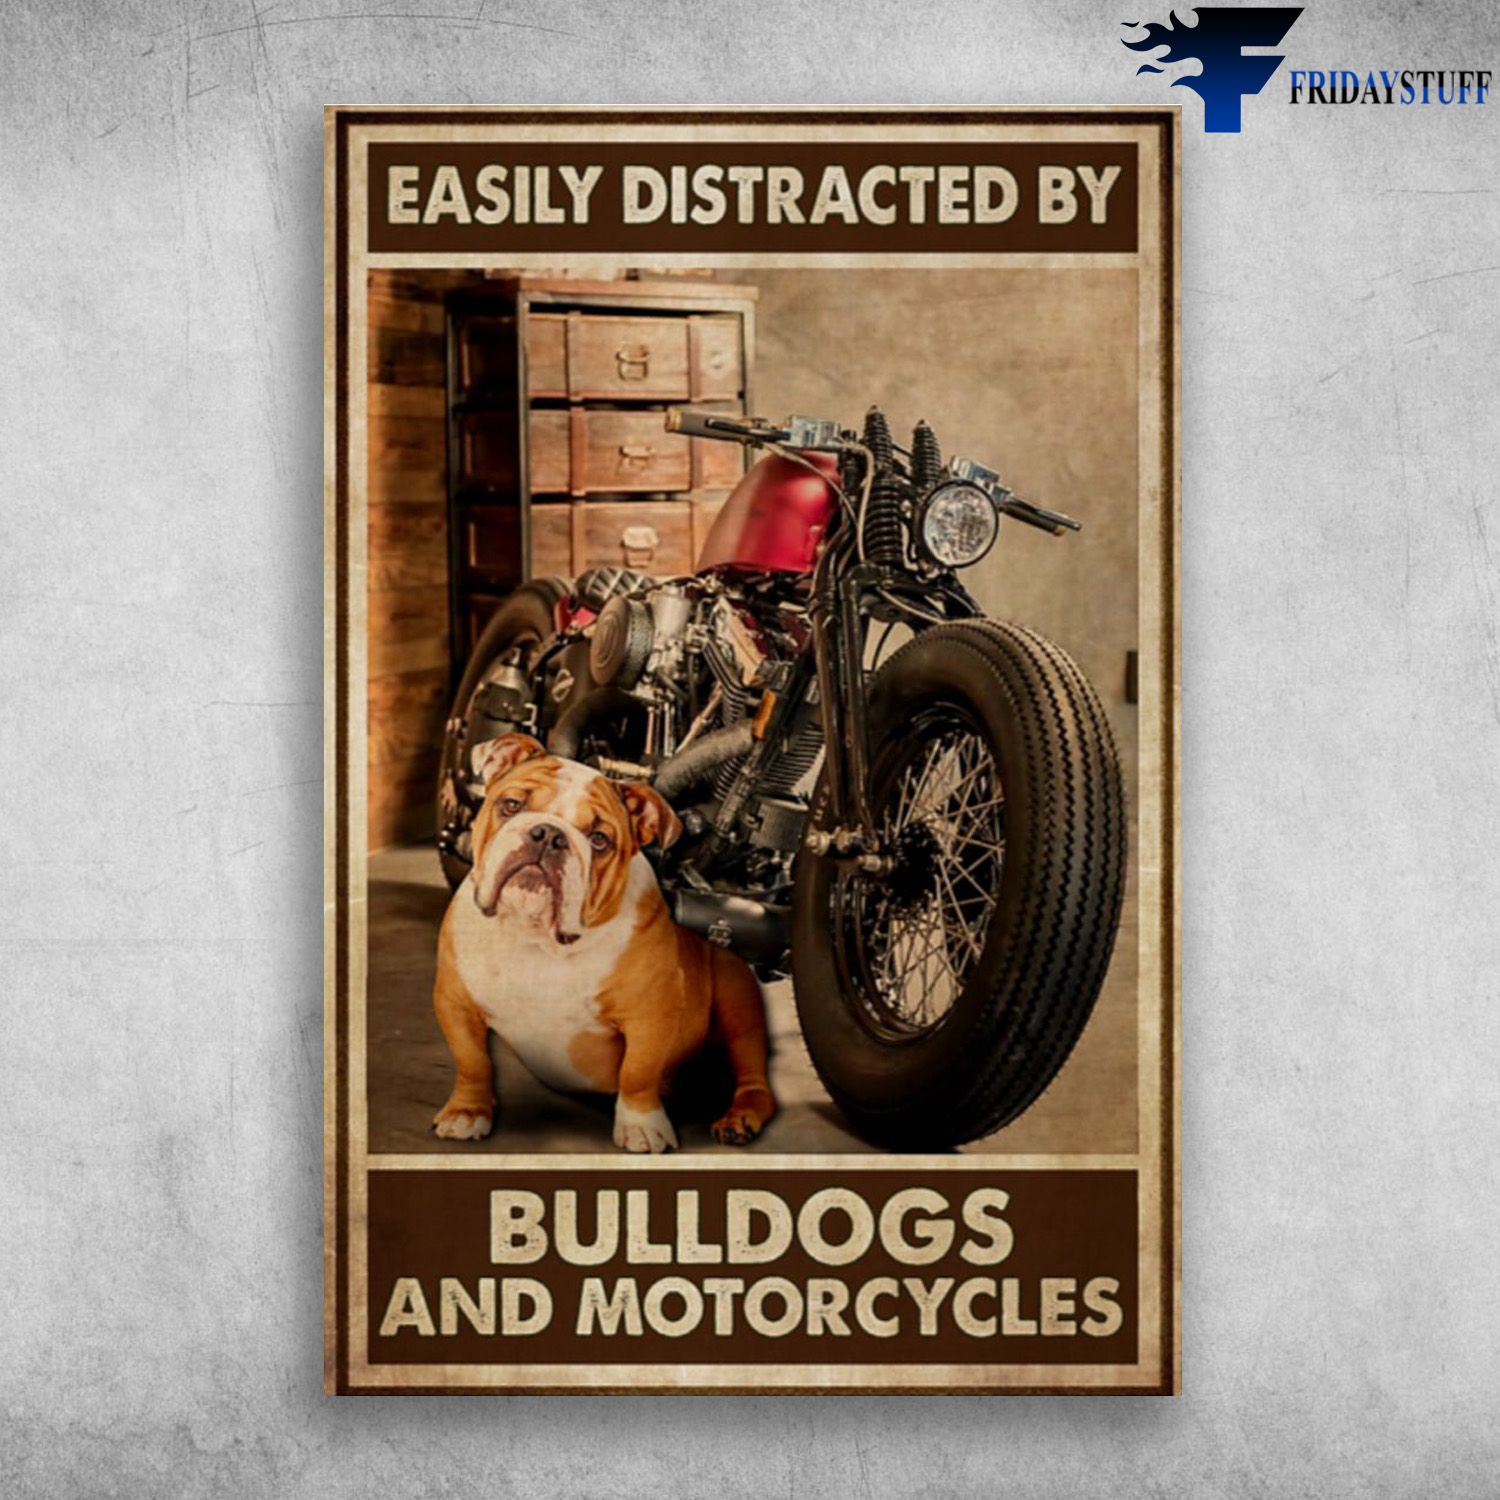 Bulldog And Motorcycles - Easily Distracted By, Bulldogs And Motorcycles